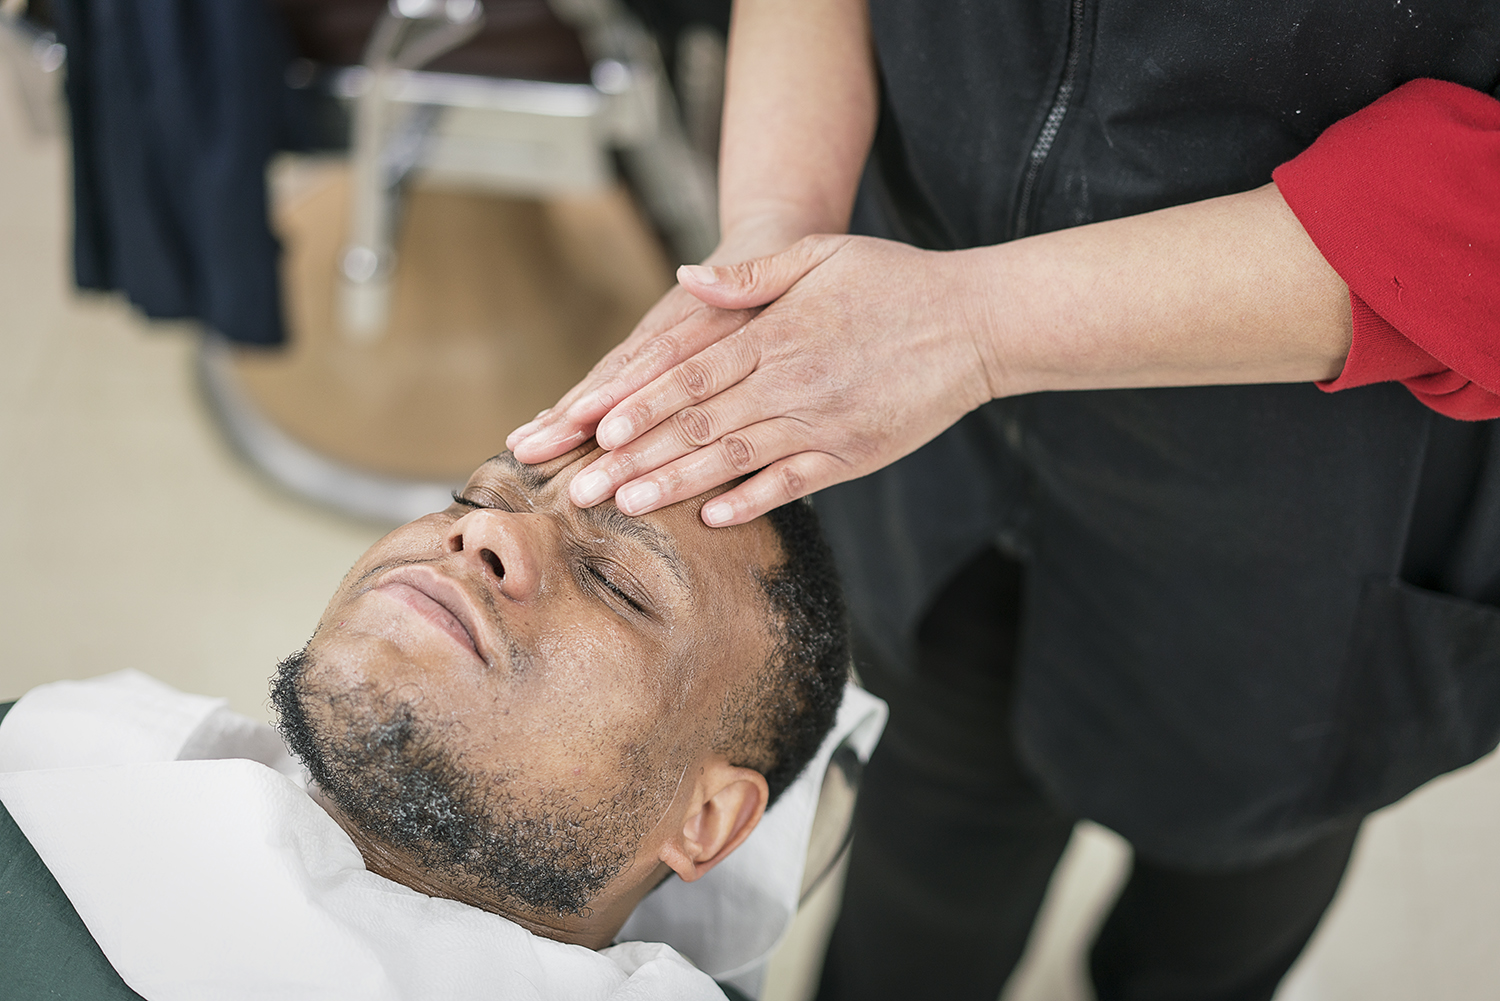 Flint, MI - Tuesday, February 6, 2018: Terry Knapp Sr., 36, from Flint, receives a facial during the slow hours of the day when students are allowed to practice services on other students at the Flint Institute of Barbering.